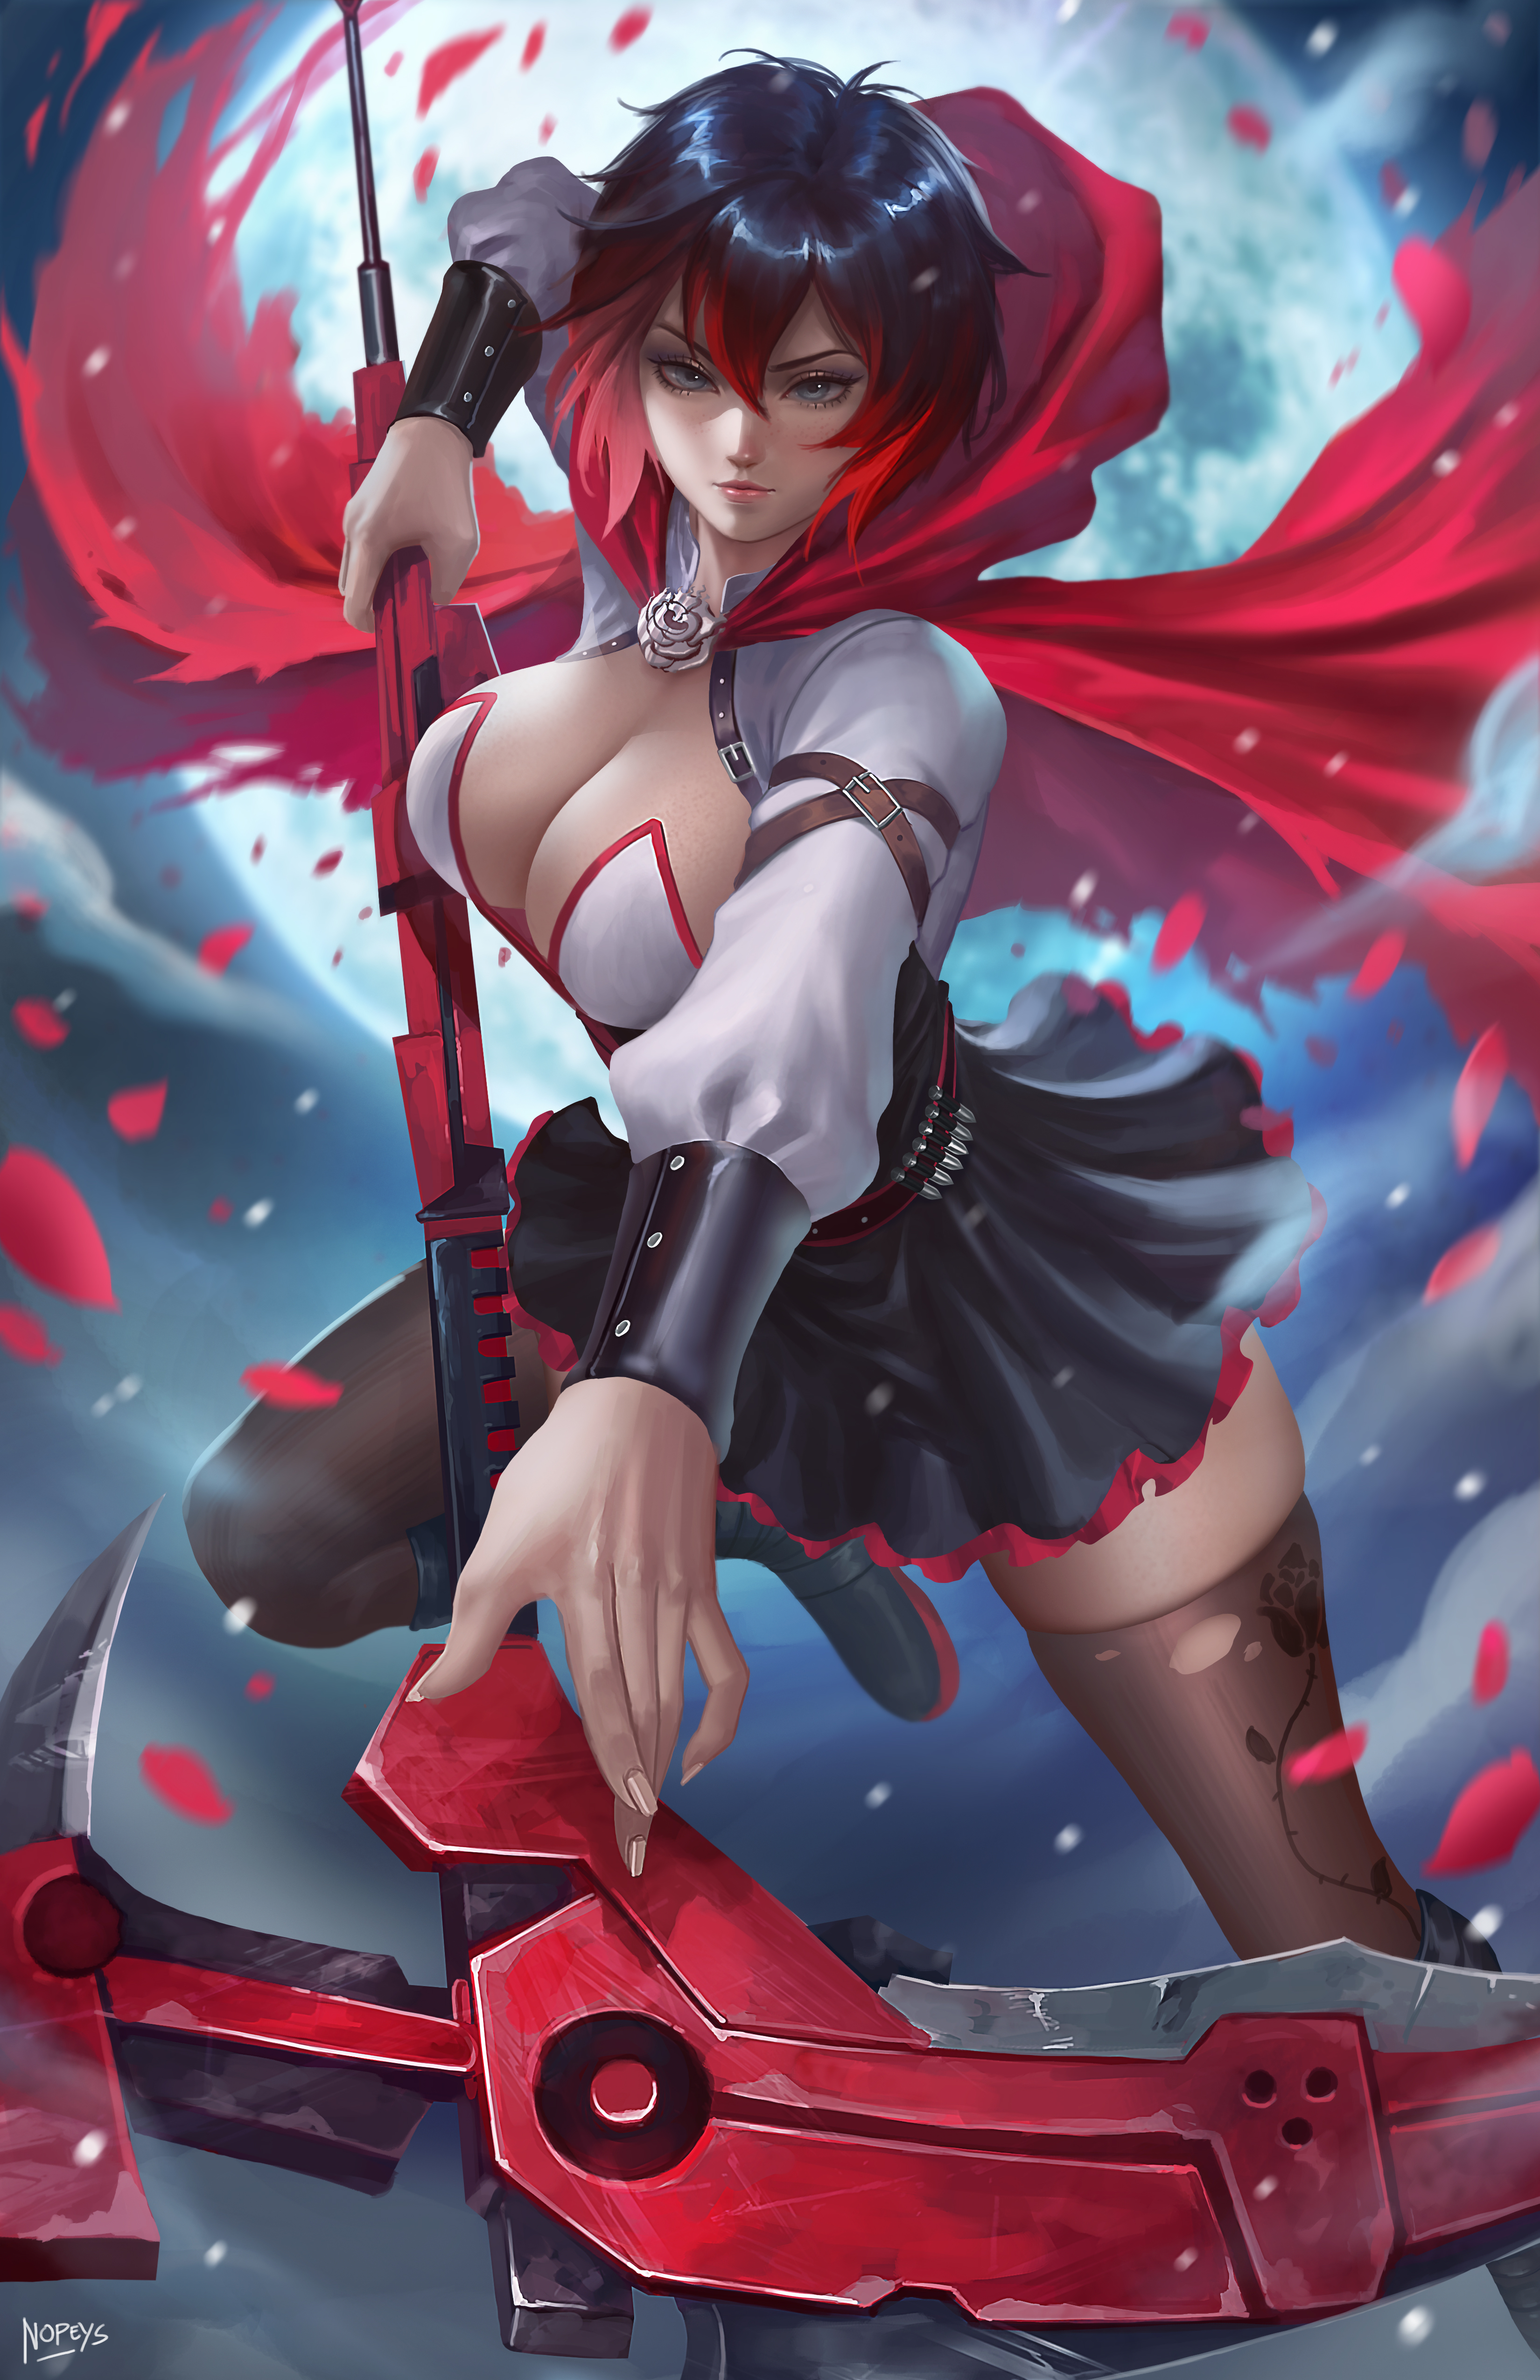 Ruby Rose RWBY RWBY Anime Anime Girls Fantasy Girl Weapon Moonlight Cape Dress Looking At Viewer Fre 3300x5100